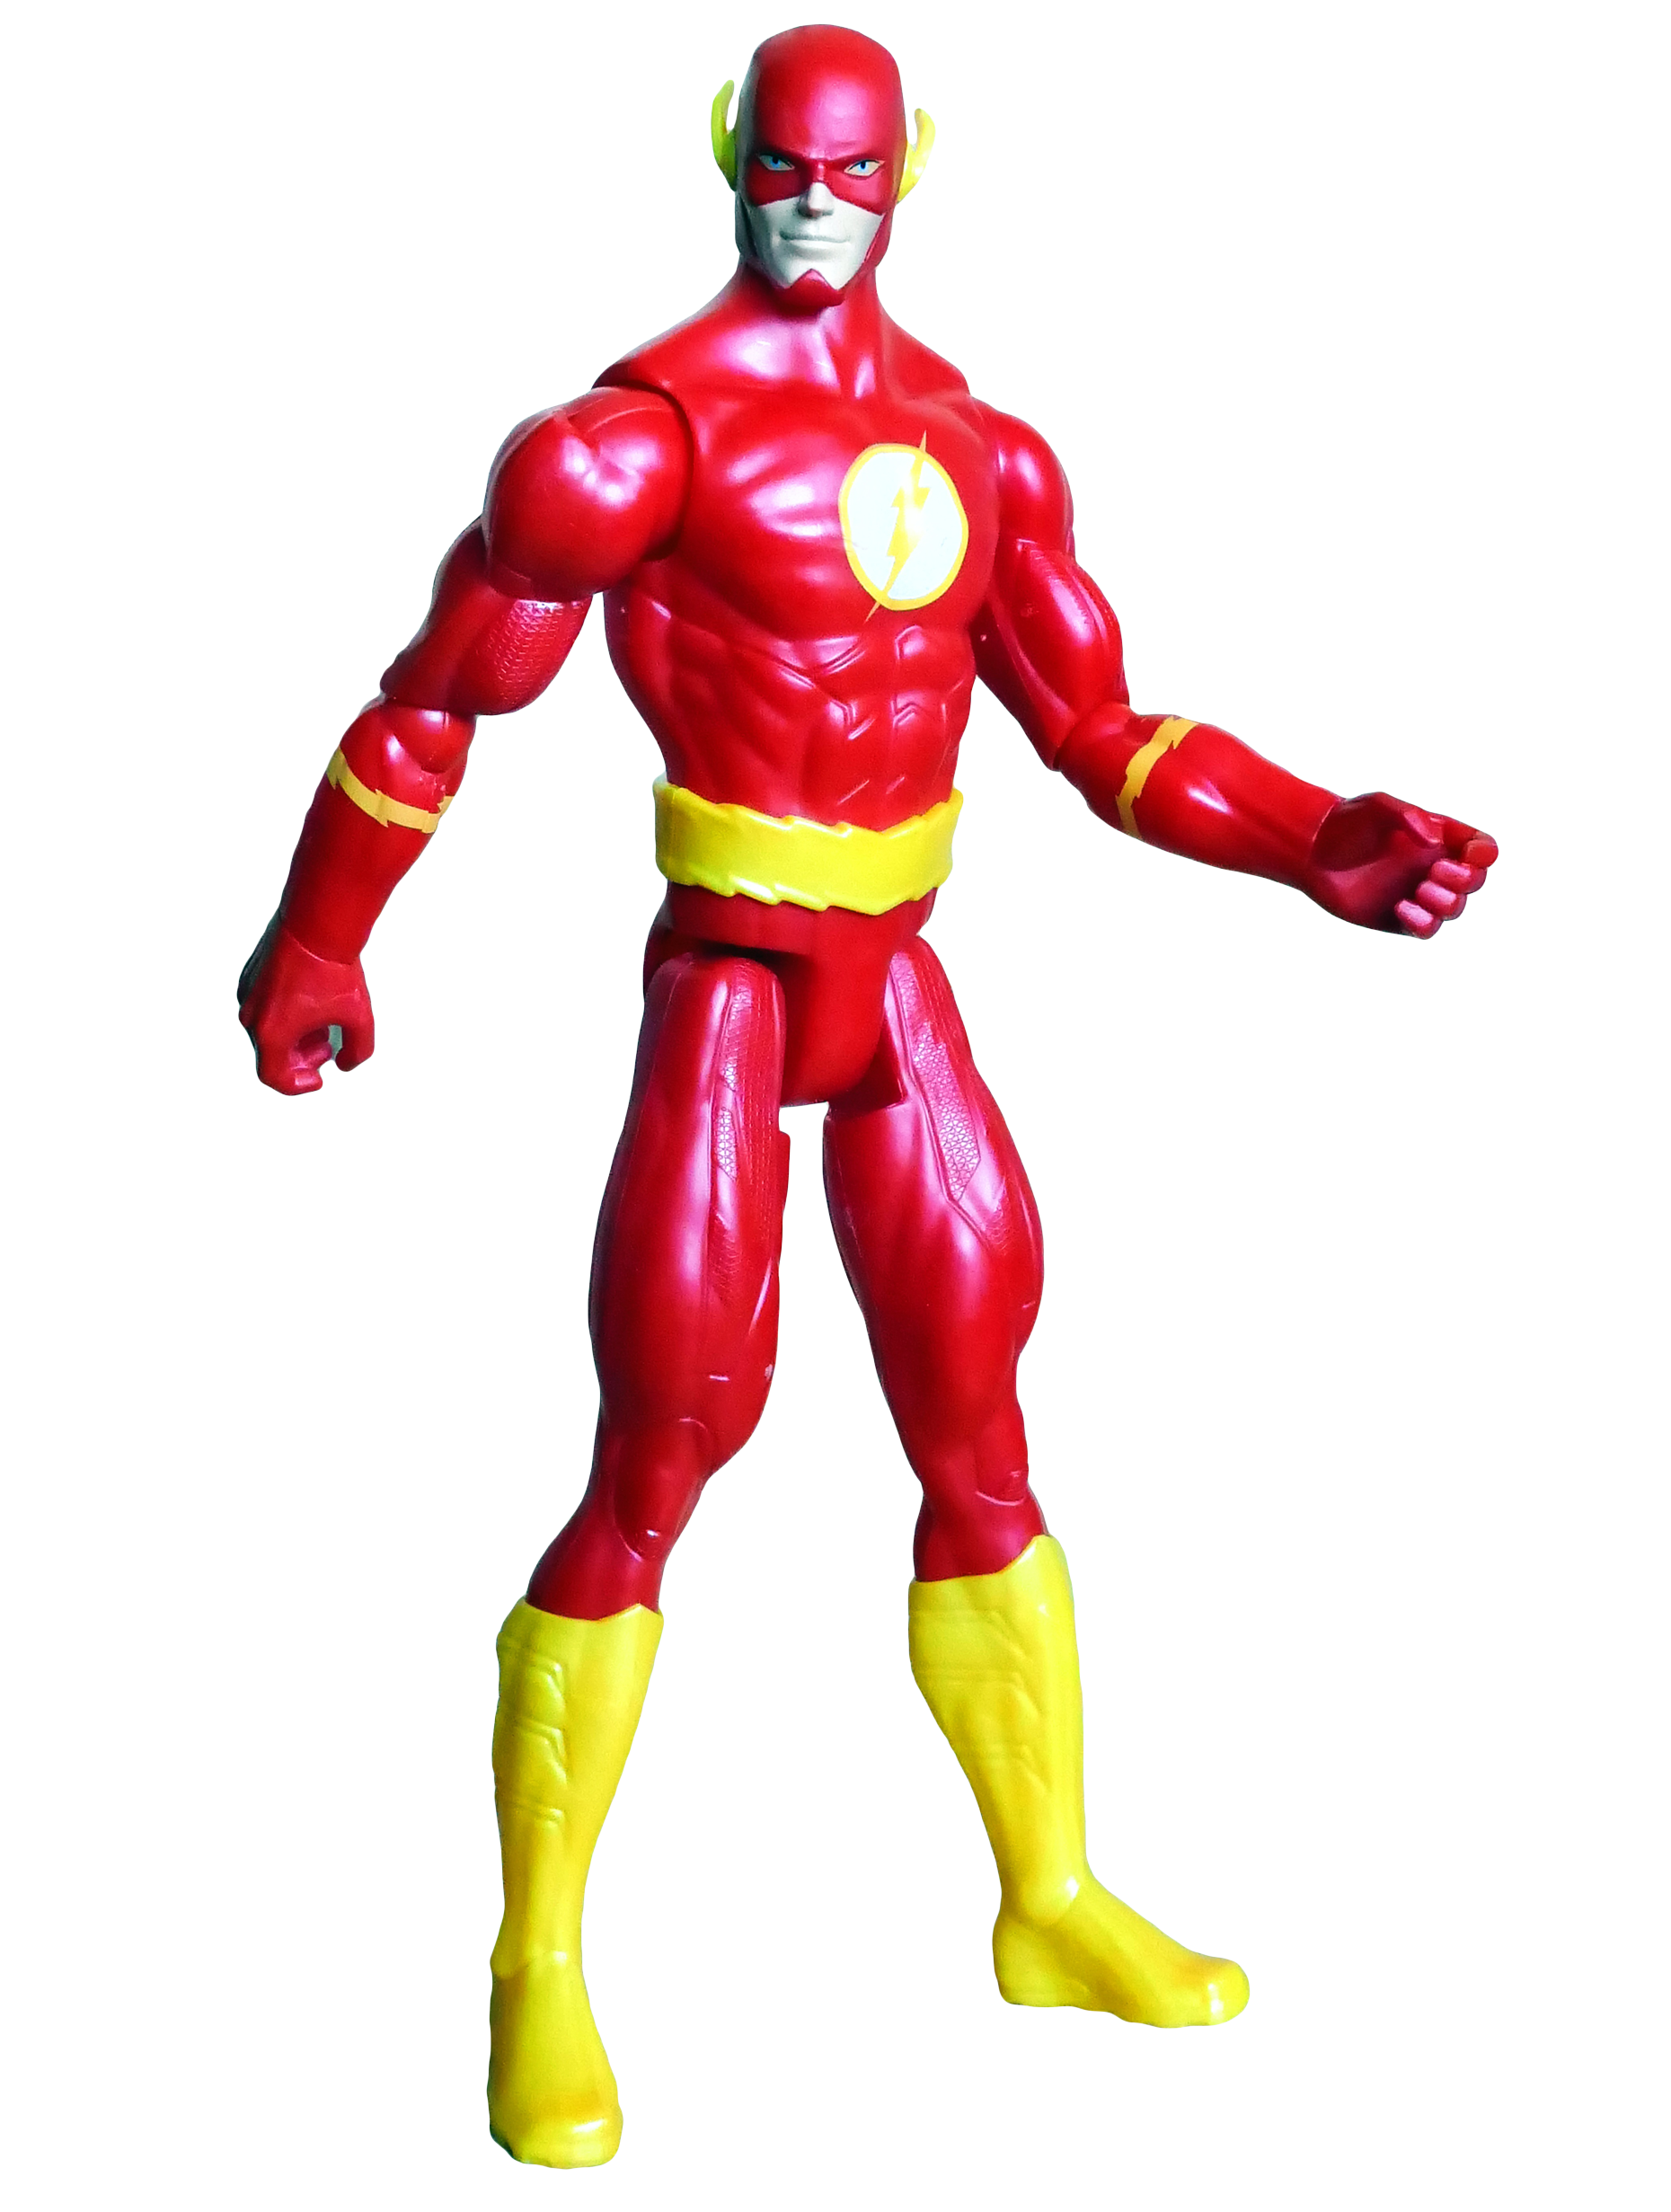 A Red And Yellow Superhero Action Figure